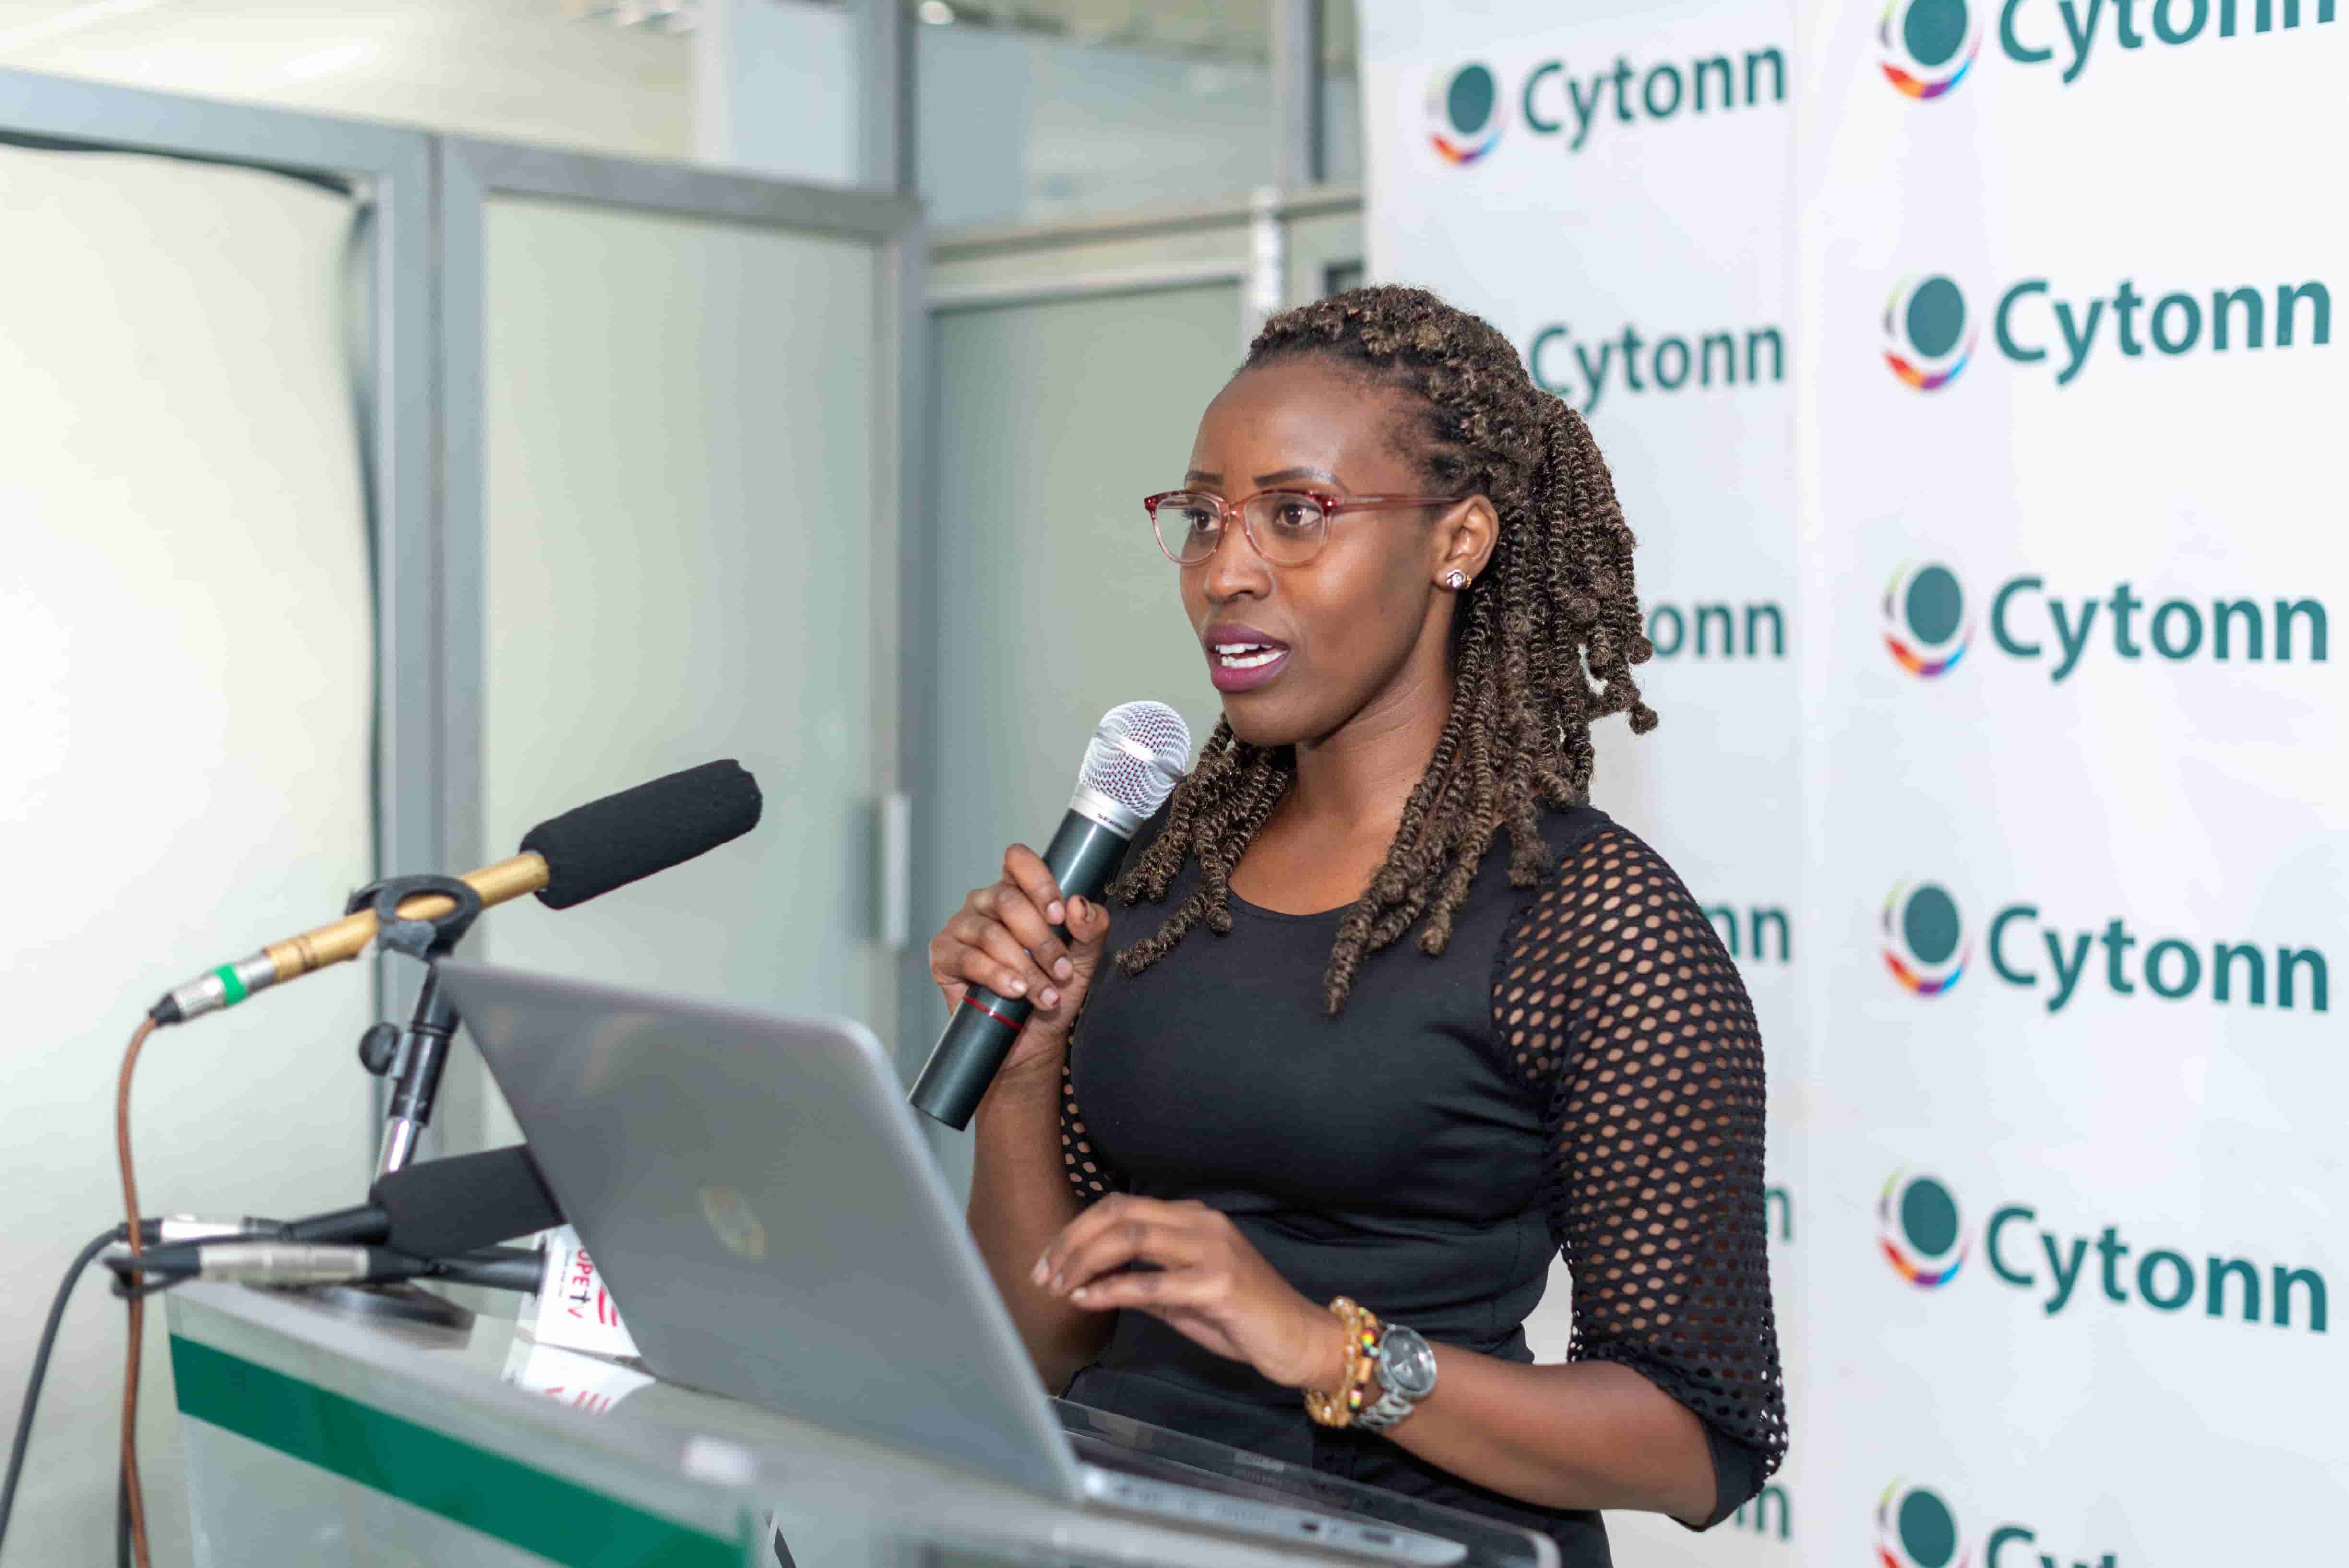 cytonn-cytonn-alma-housing-project-on-course-business-today-kenya-this-is-an-interview-on